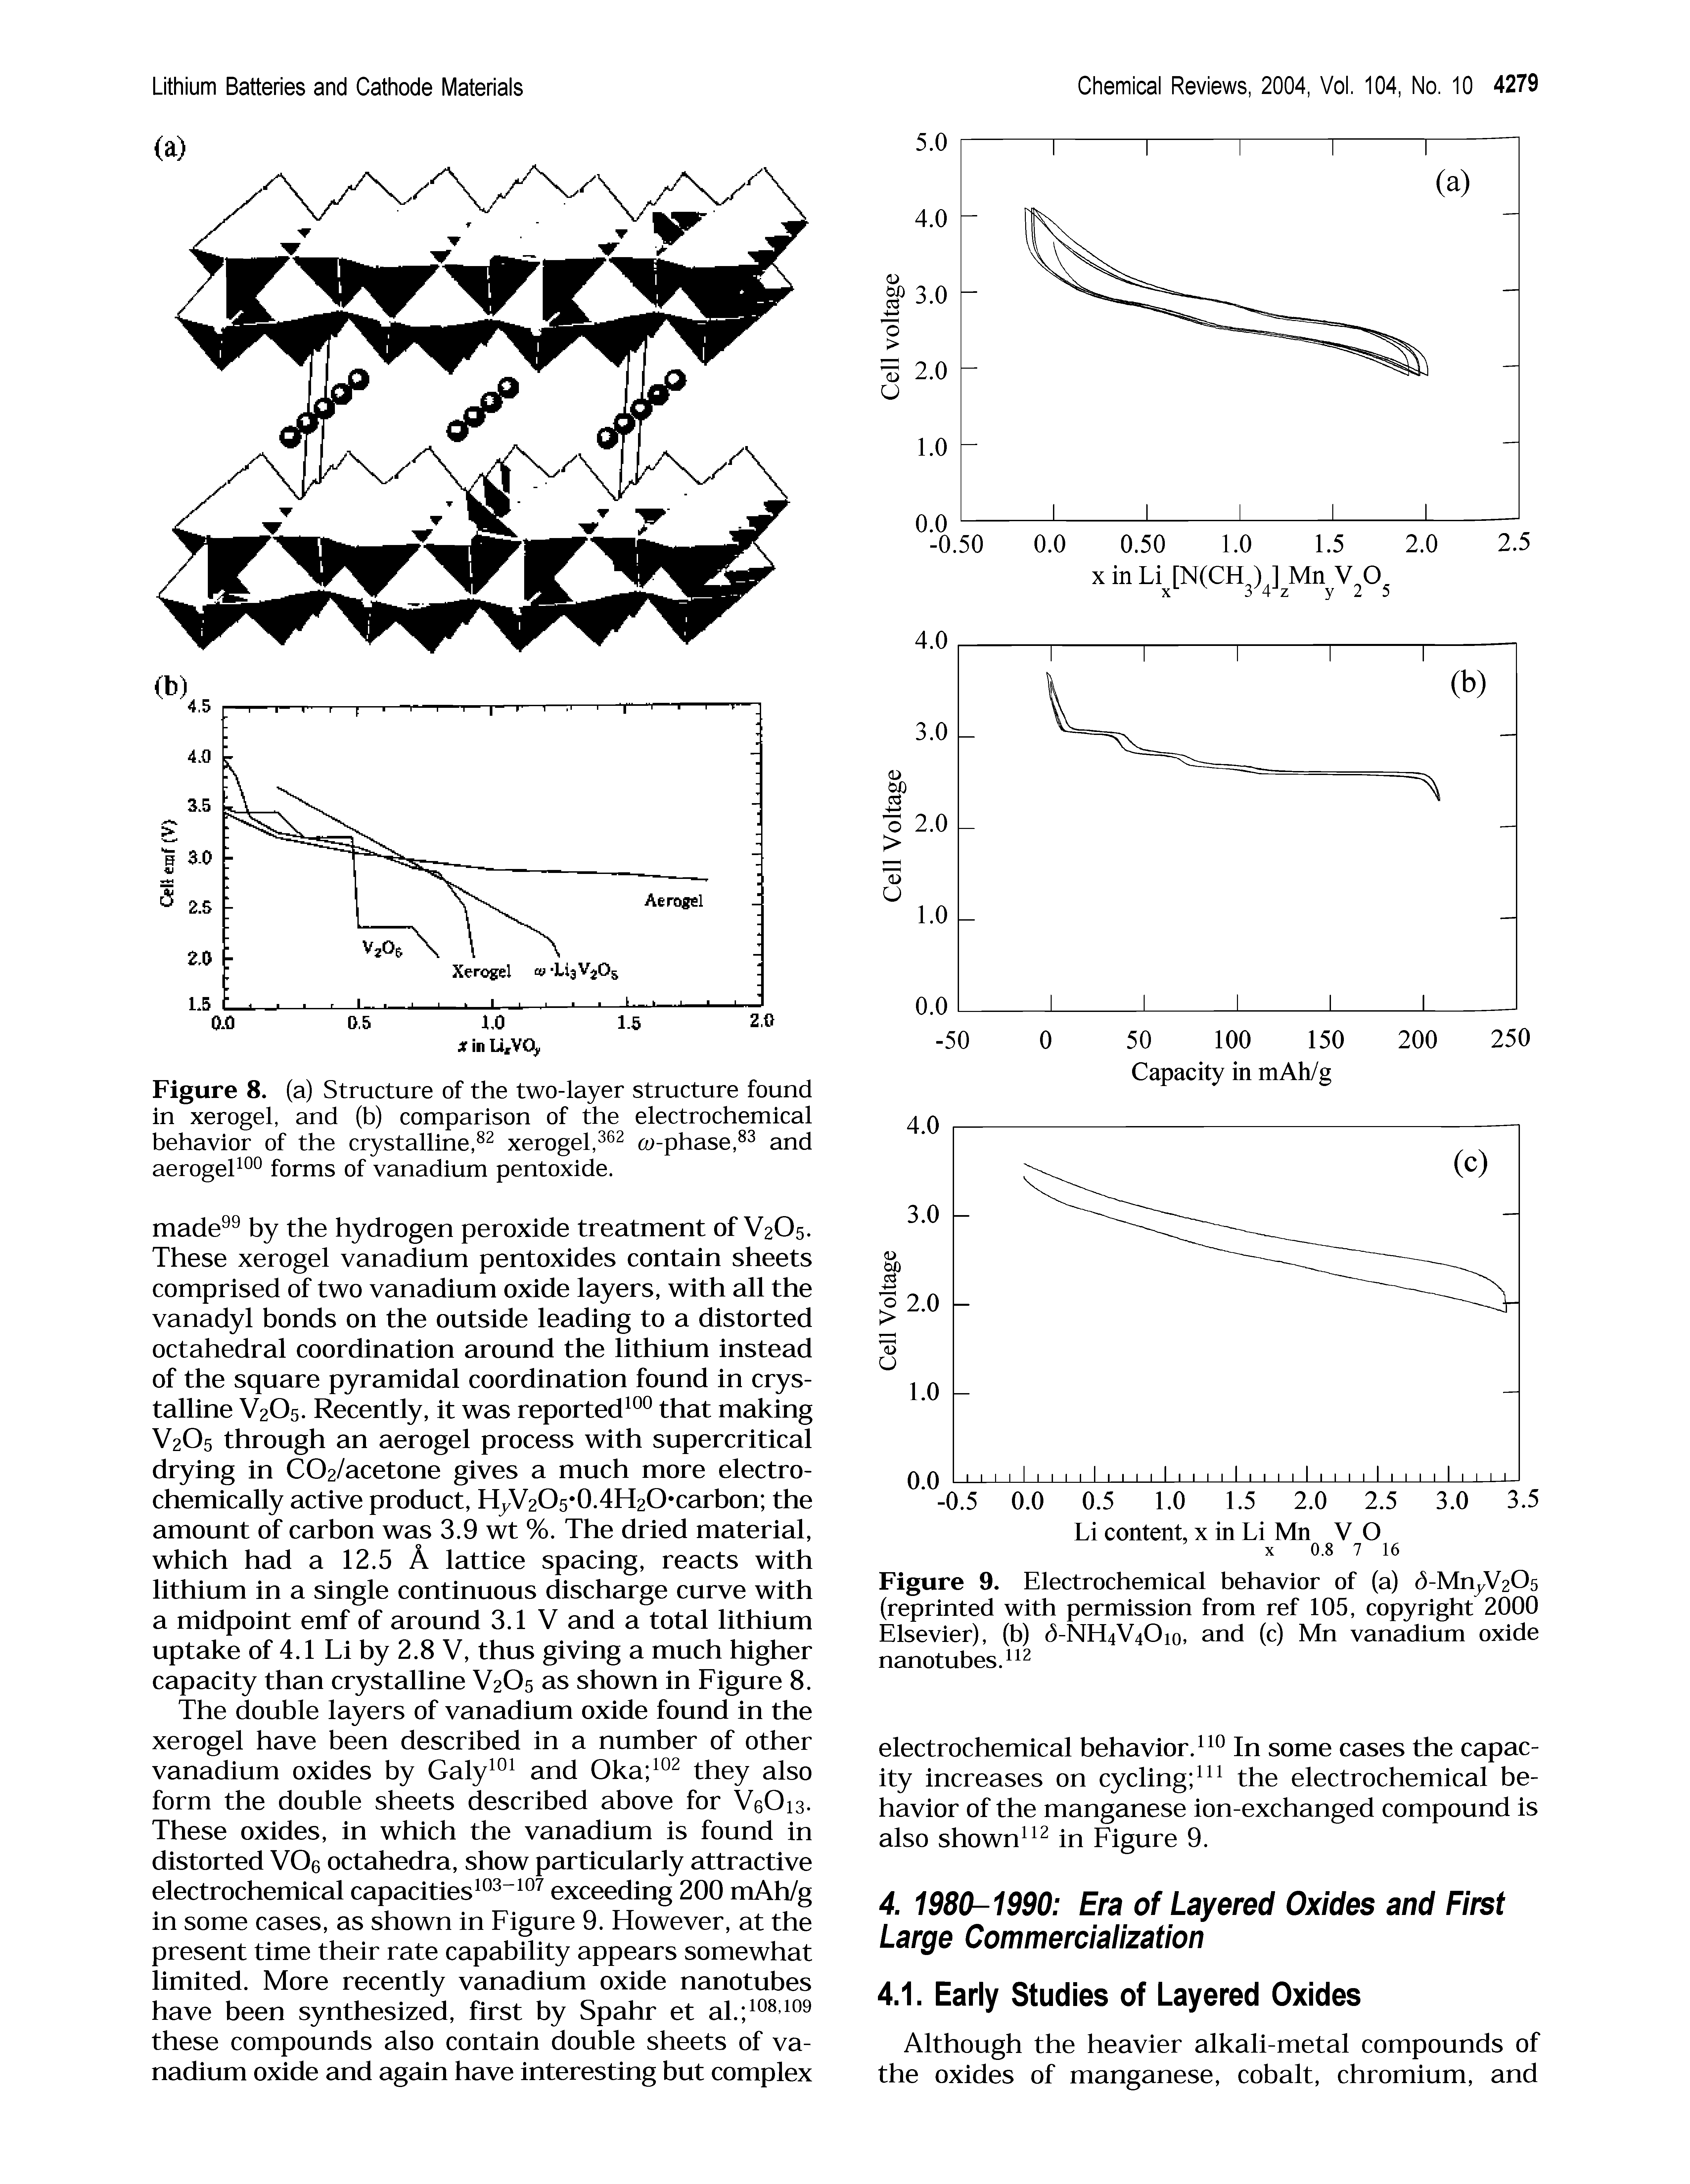 Figure 9. Electrochemical behavior of (a) -MnjY205 (reprinted with permission from ref 105, copyright 2000 Elsevier), (b) -NH4V40io, and (c) Mn vanadium oxide nanotubes.